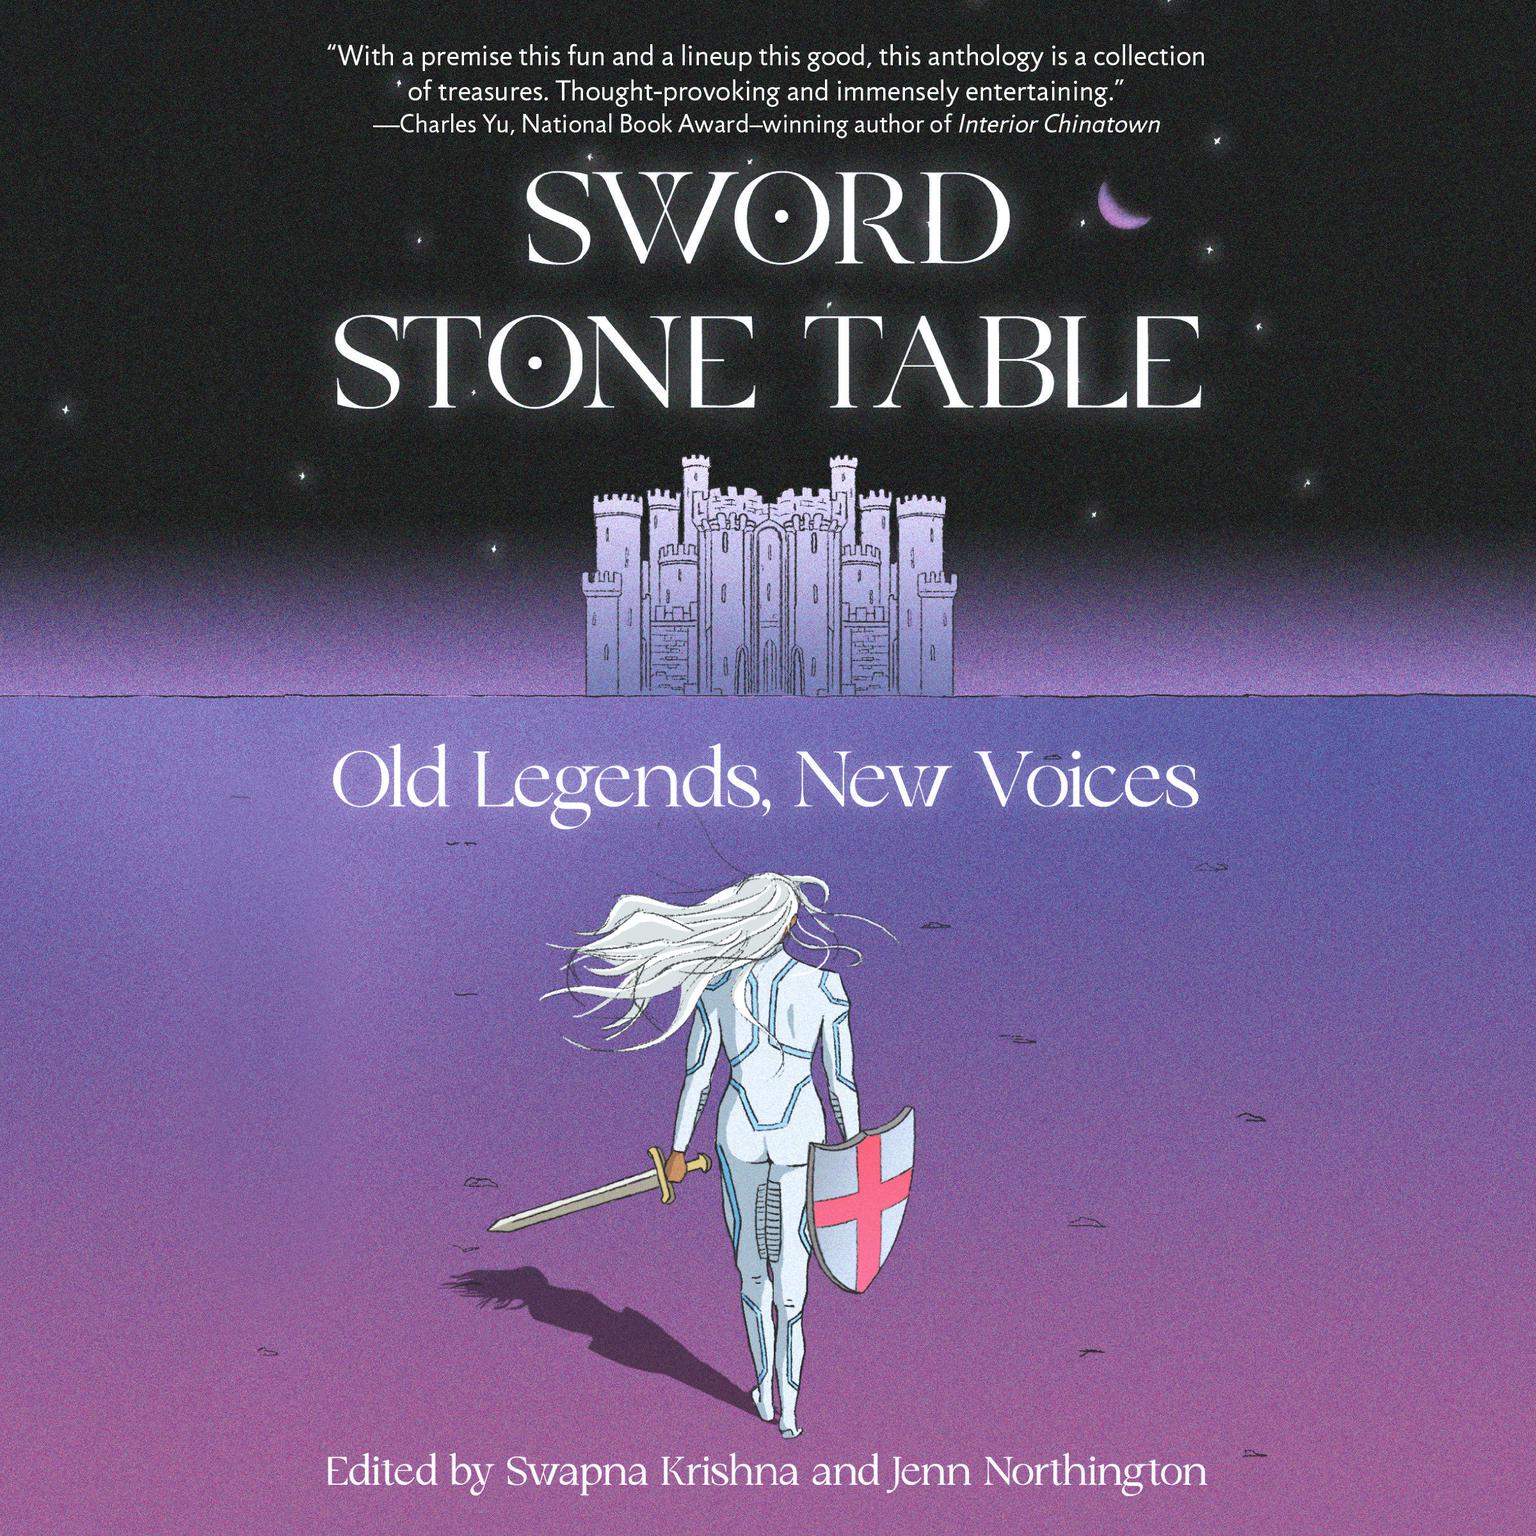 Sword Stone Table: Old Legends, New Voices Audiobook, by Jenn Northington